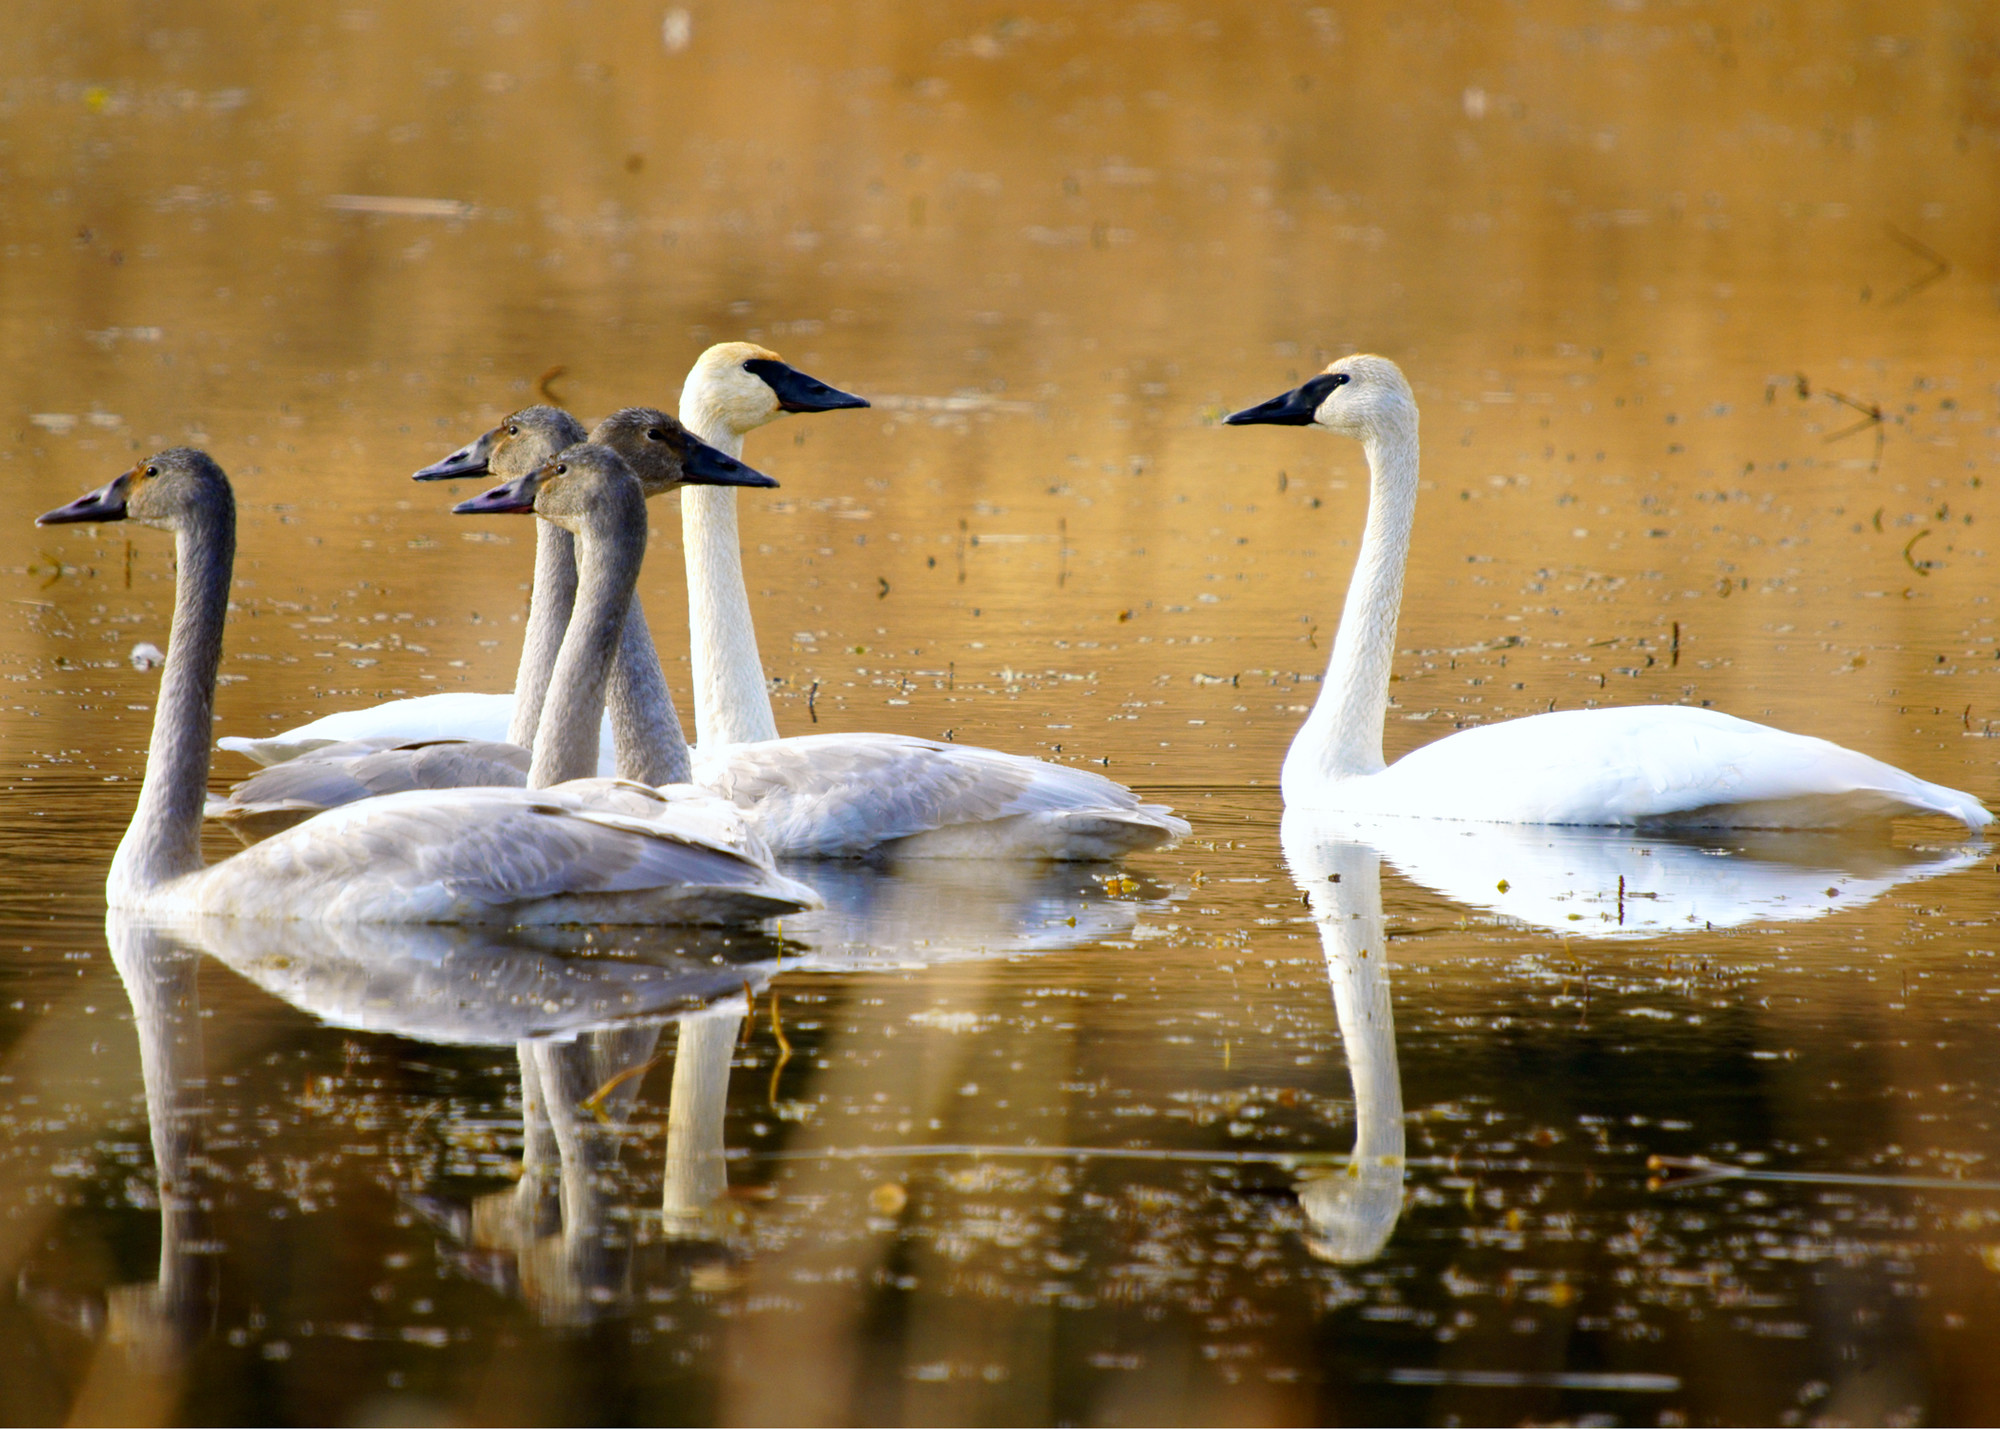 Six swans floating on a still lake